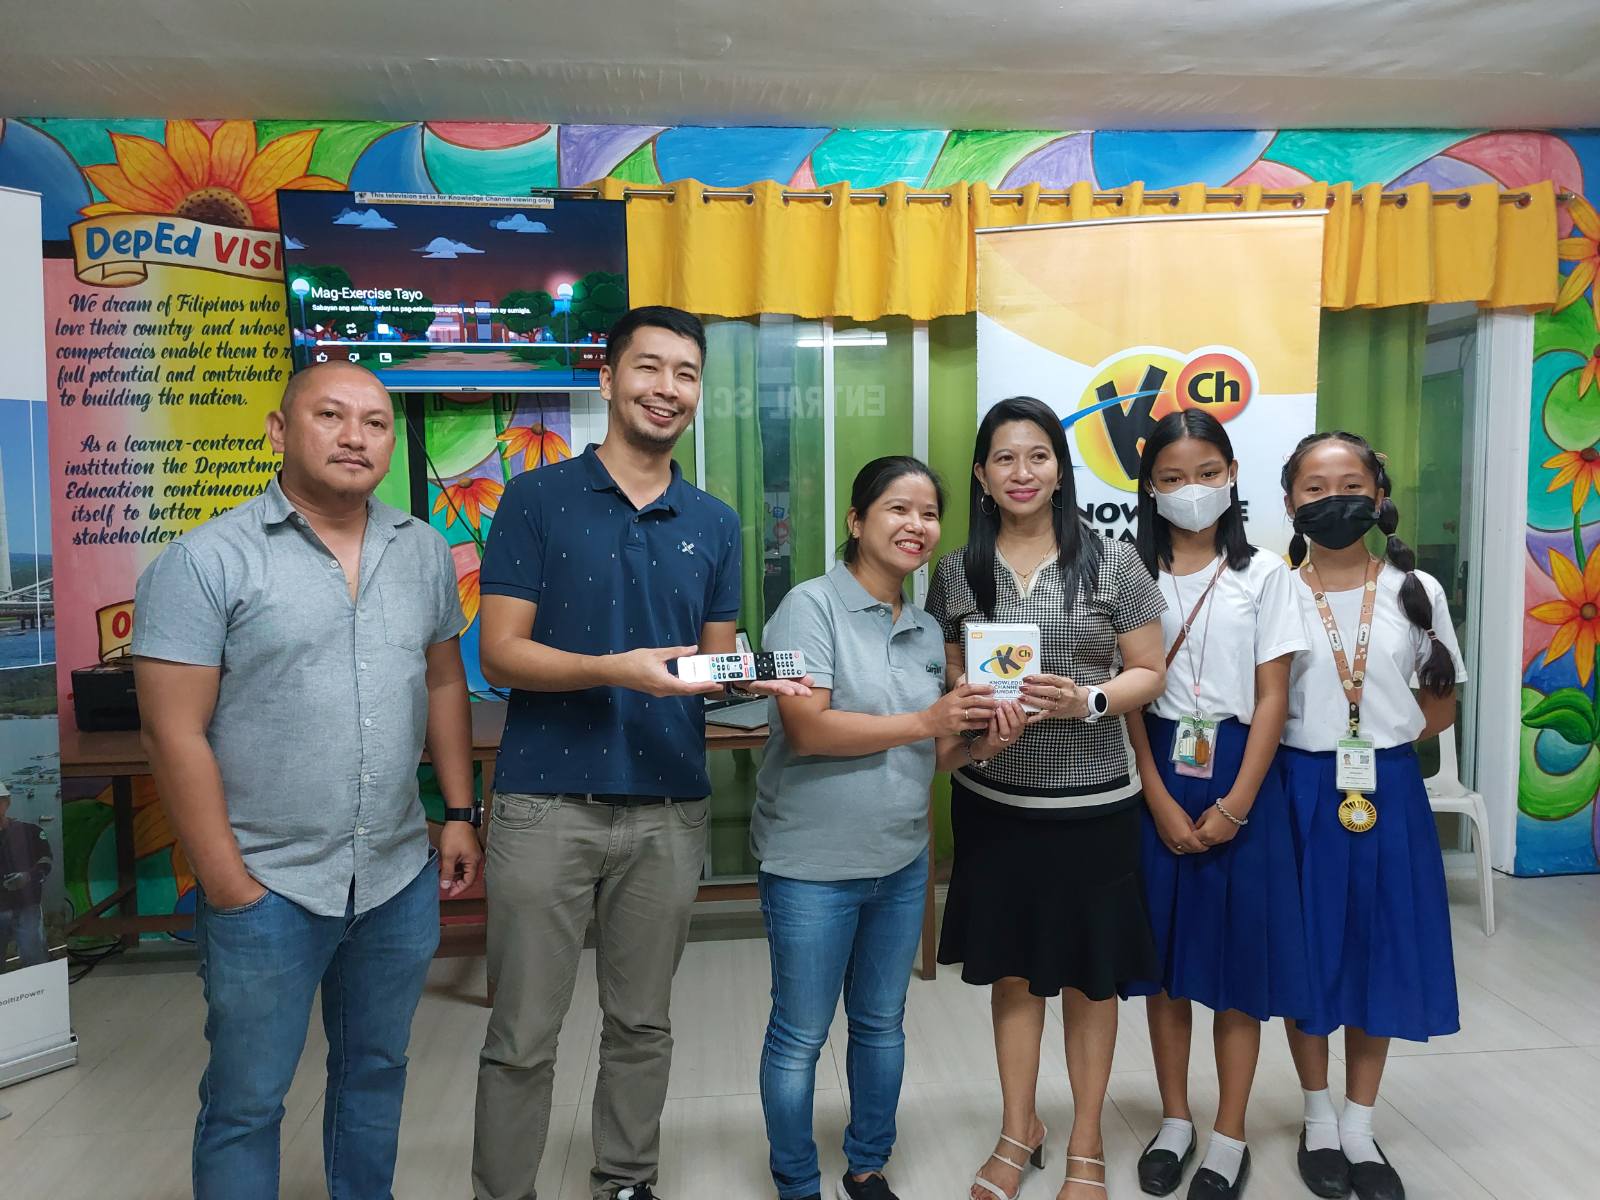 Knowledge Channel, AboitizPower lead support for more mobile libraries